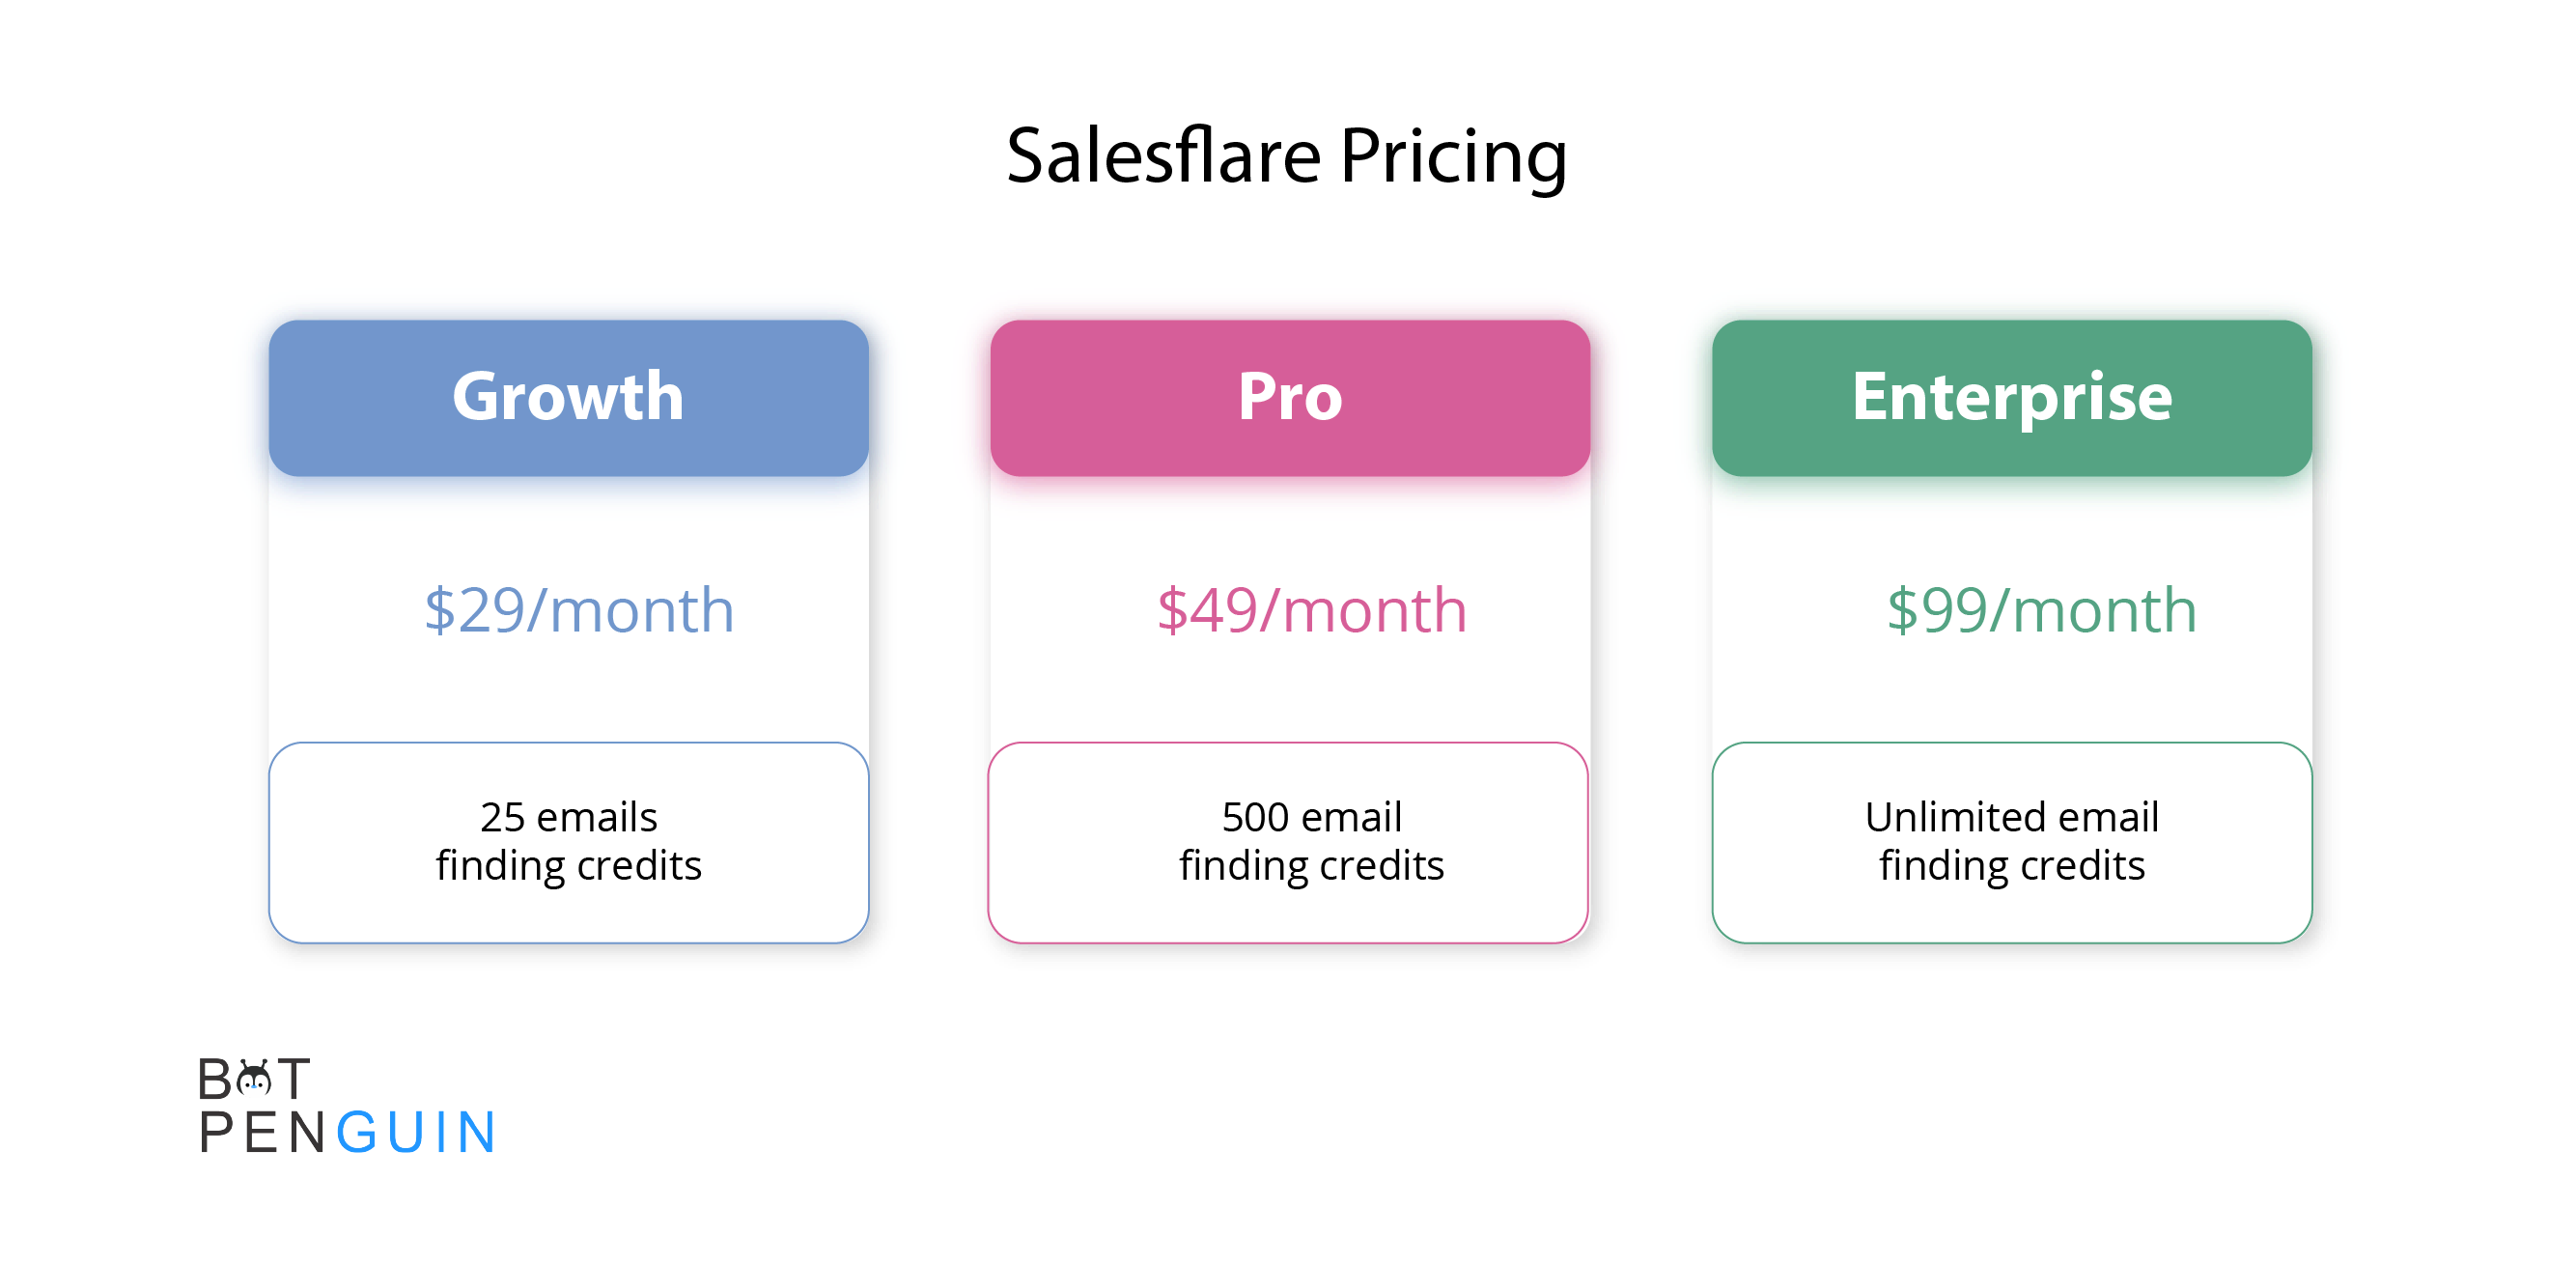 Salesflare Pricing